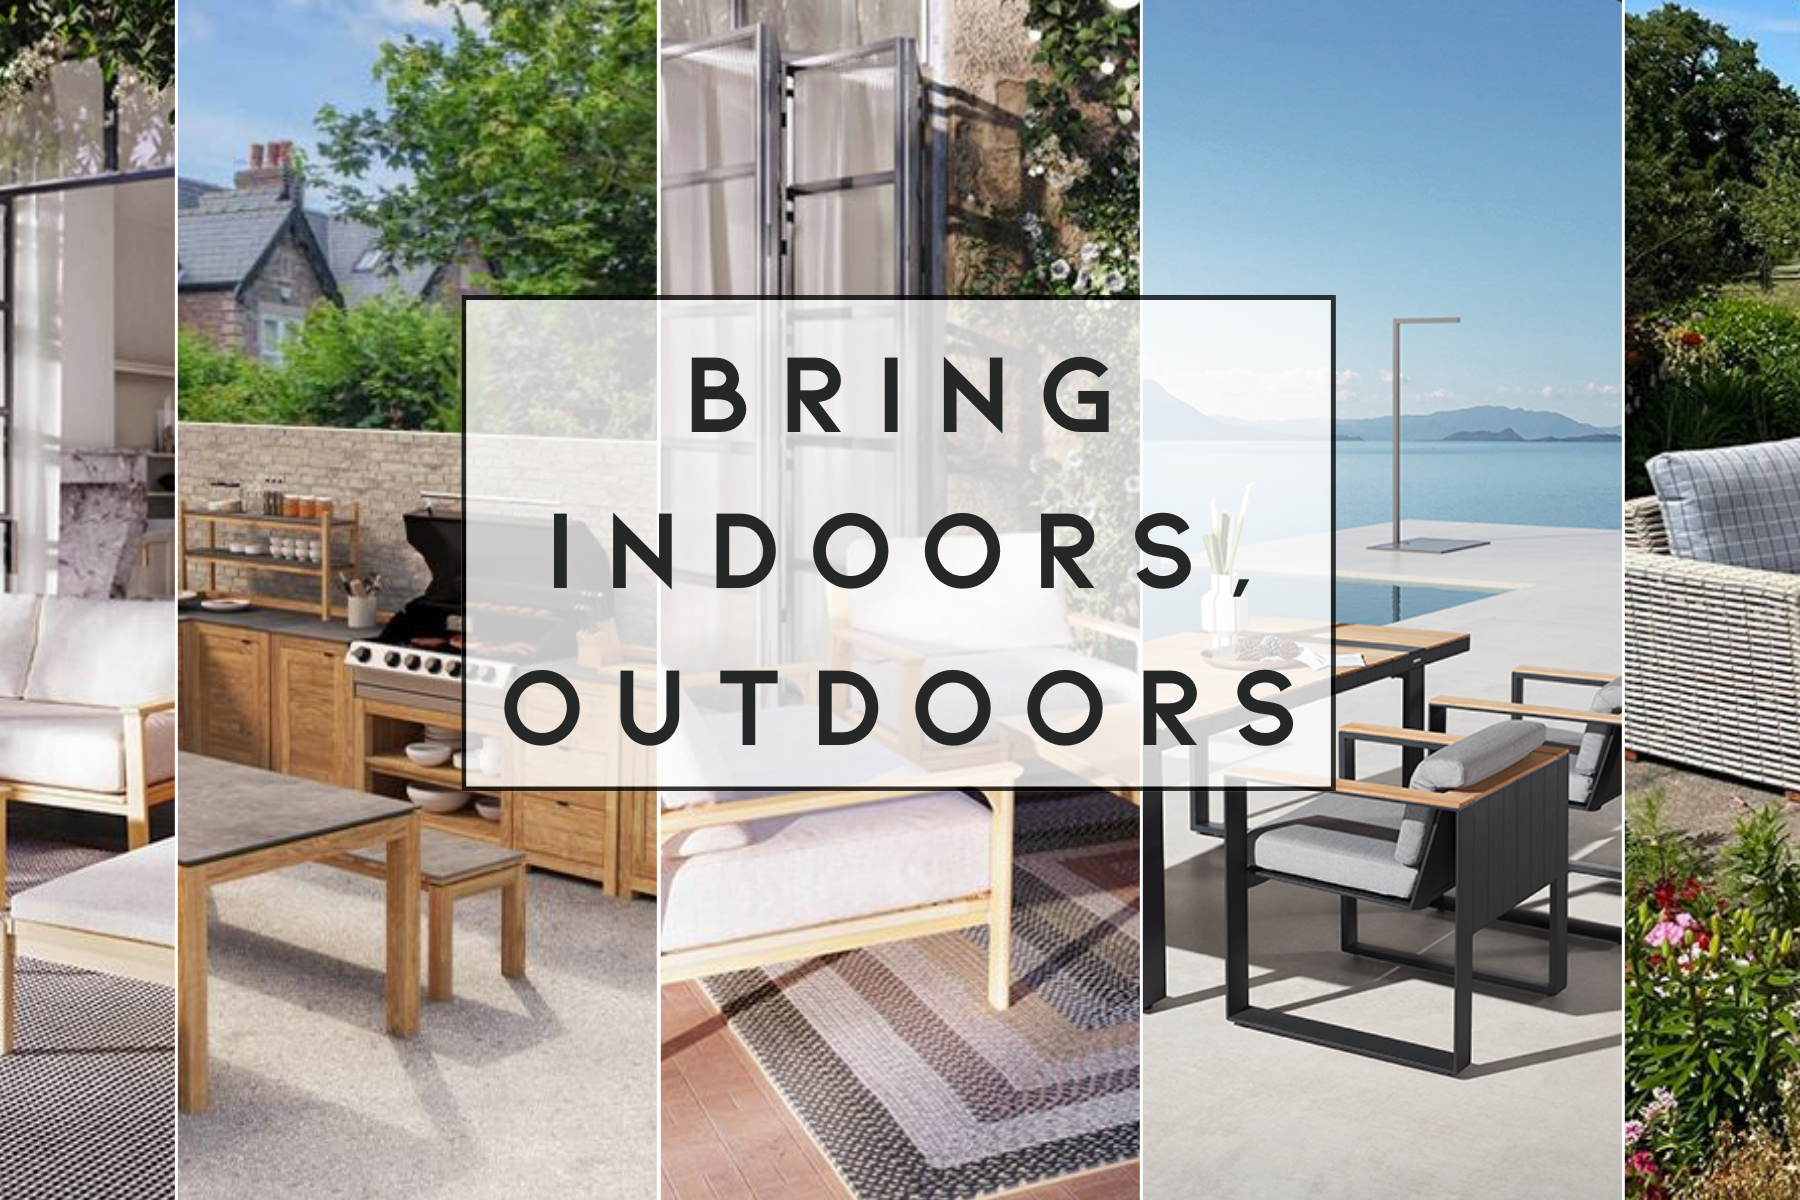 A guide to brining your indoors, outdoors